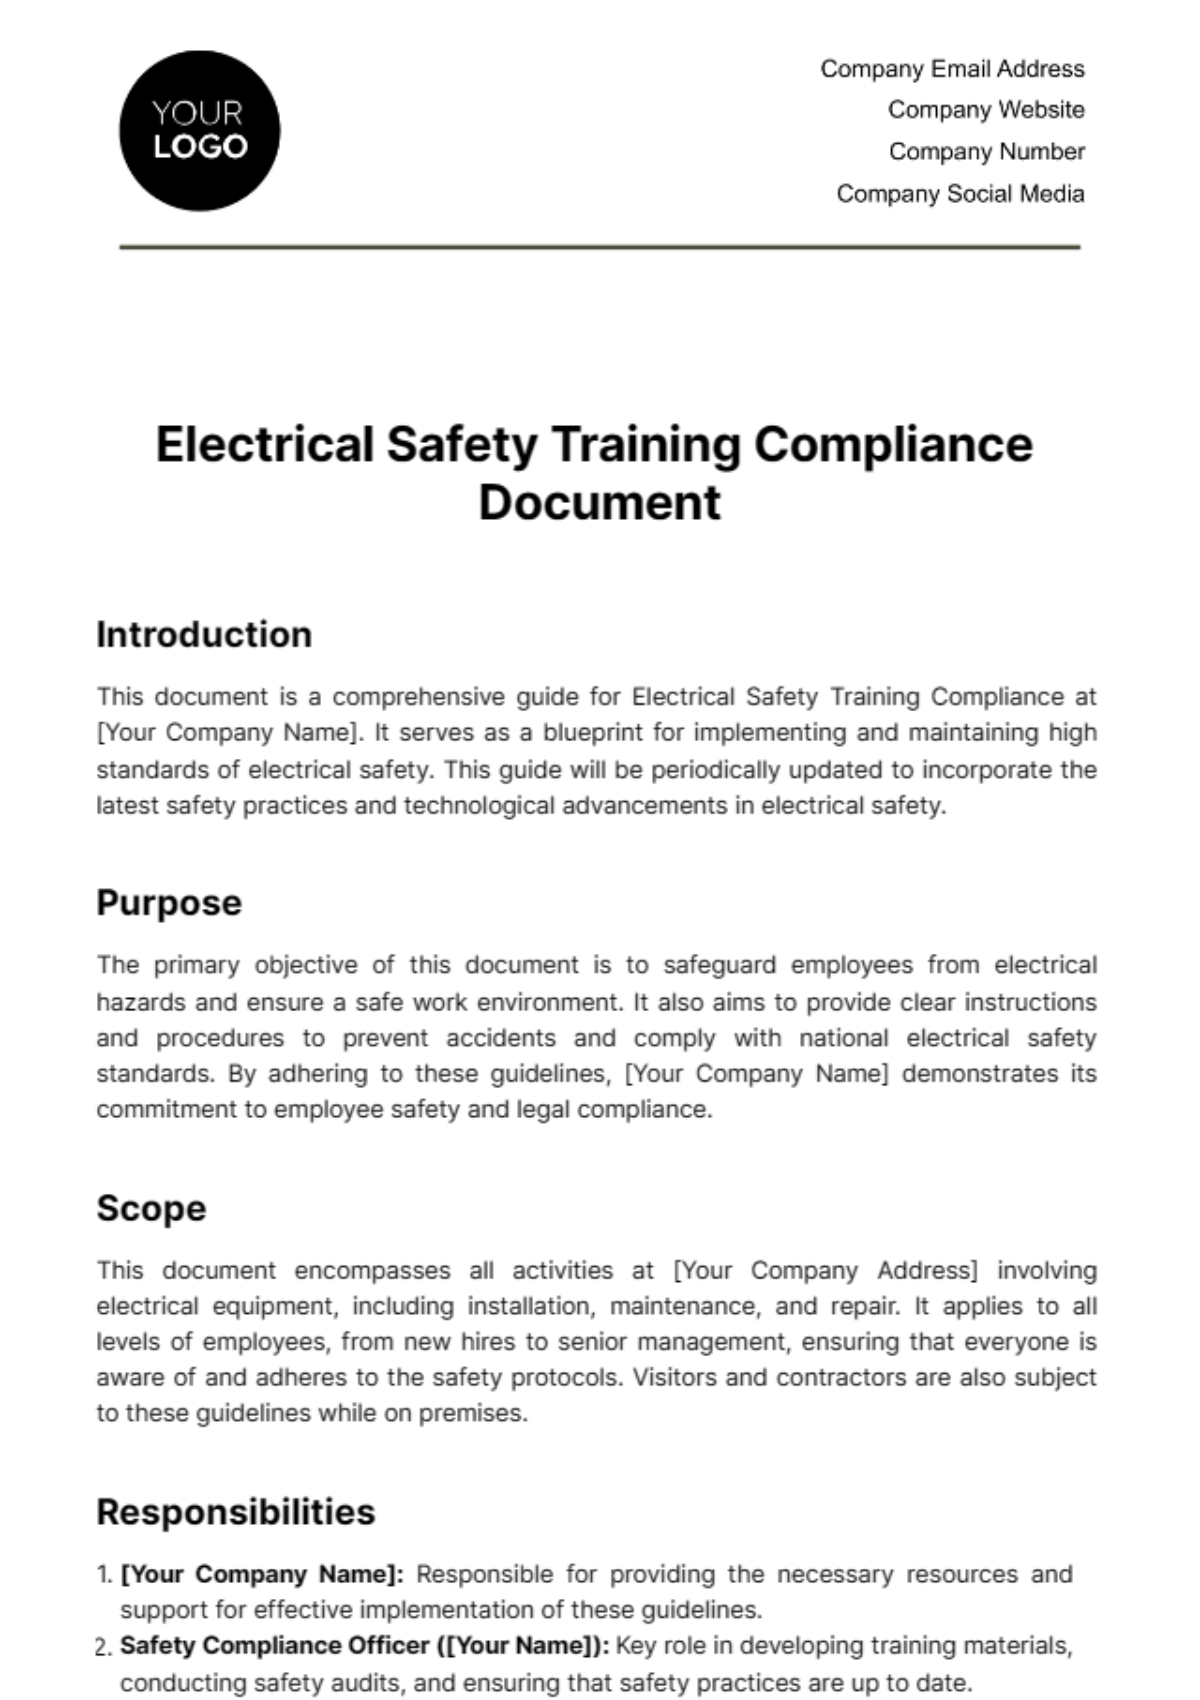 Free Electrical Safety Training Compliance Document Template